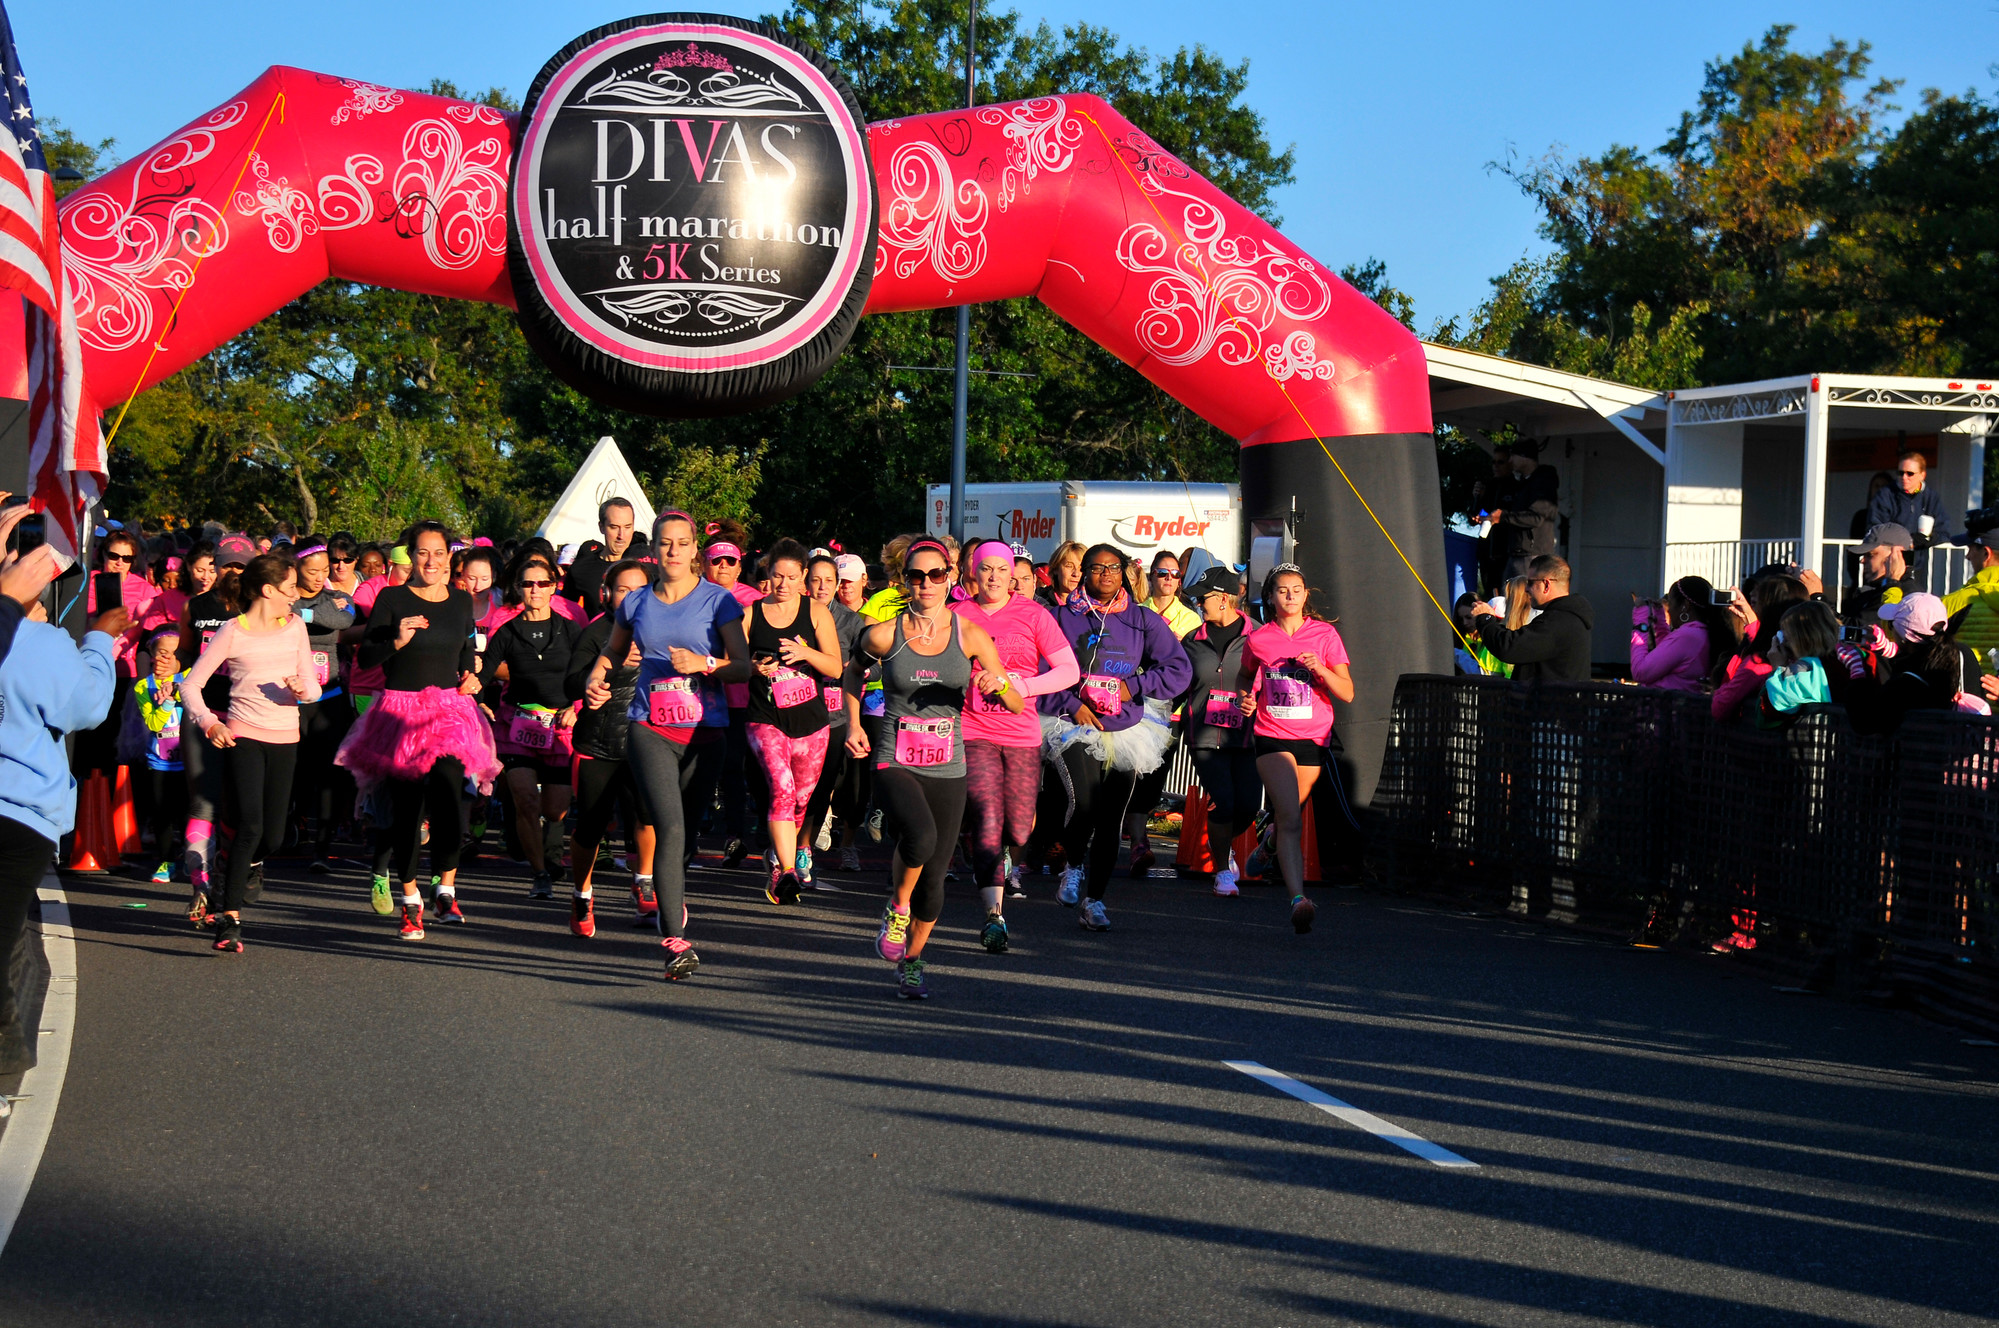 Thousands participate annually in the Divas Half Marathon and 5K Series, which has become a yearly staple at Eisenhower Park.